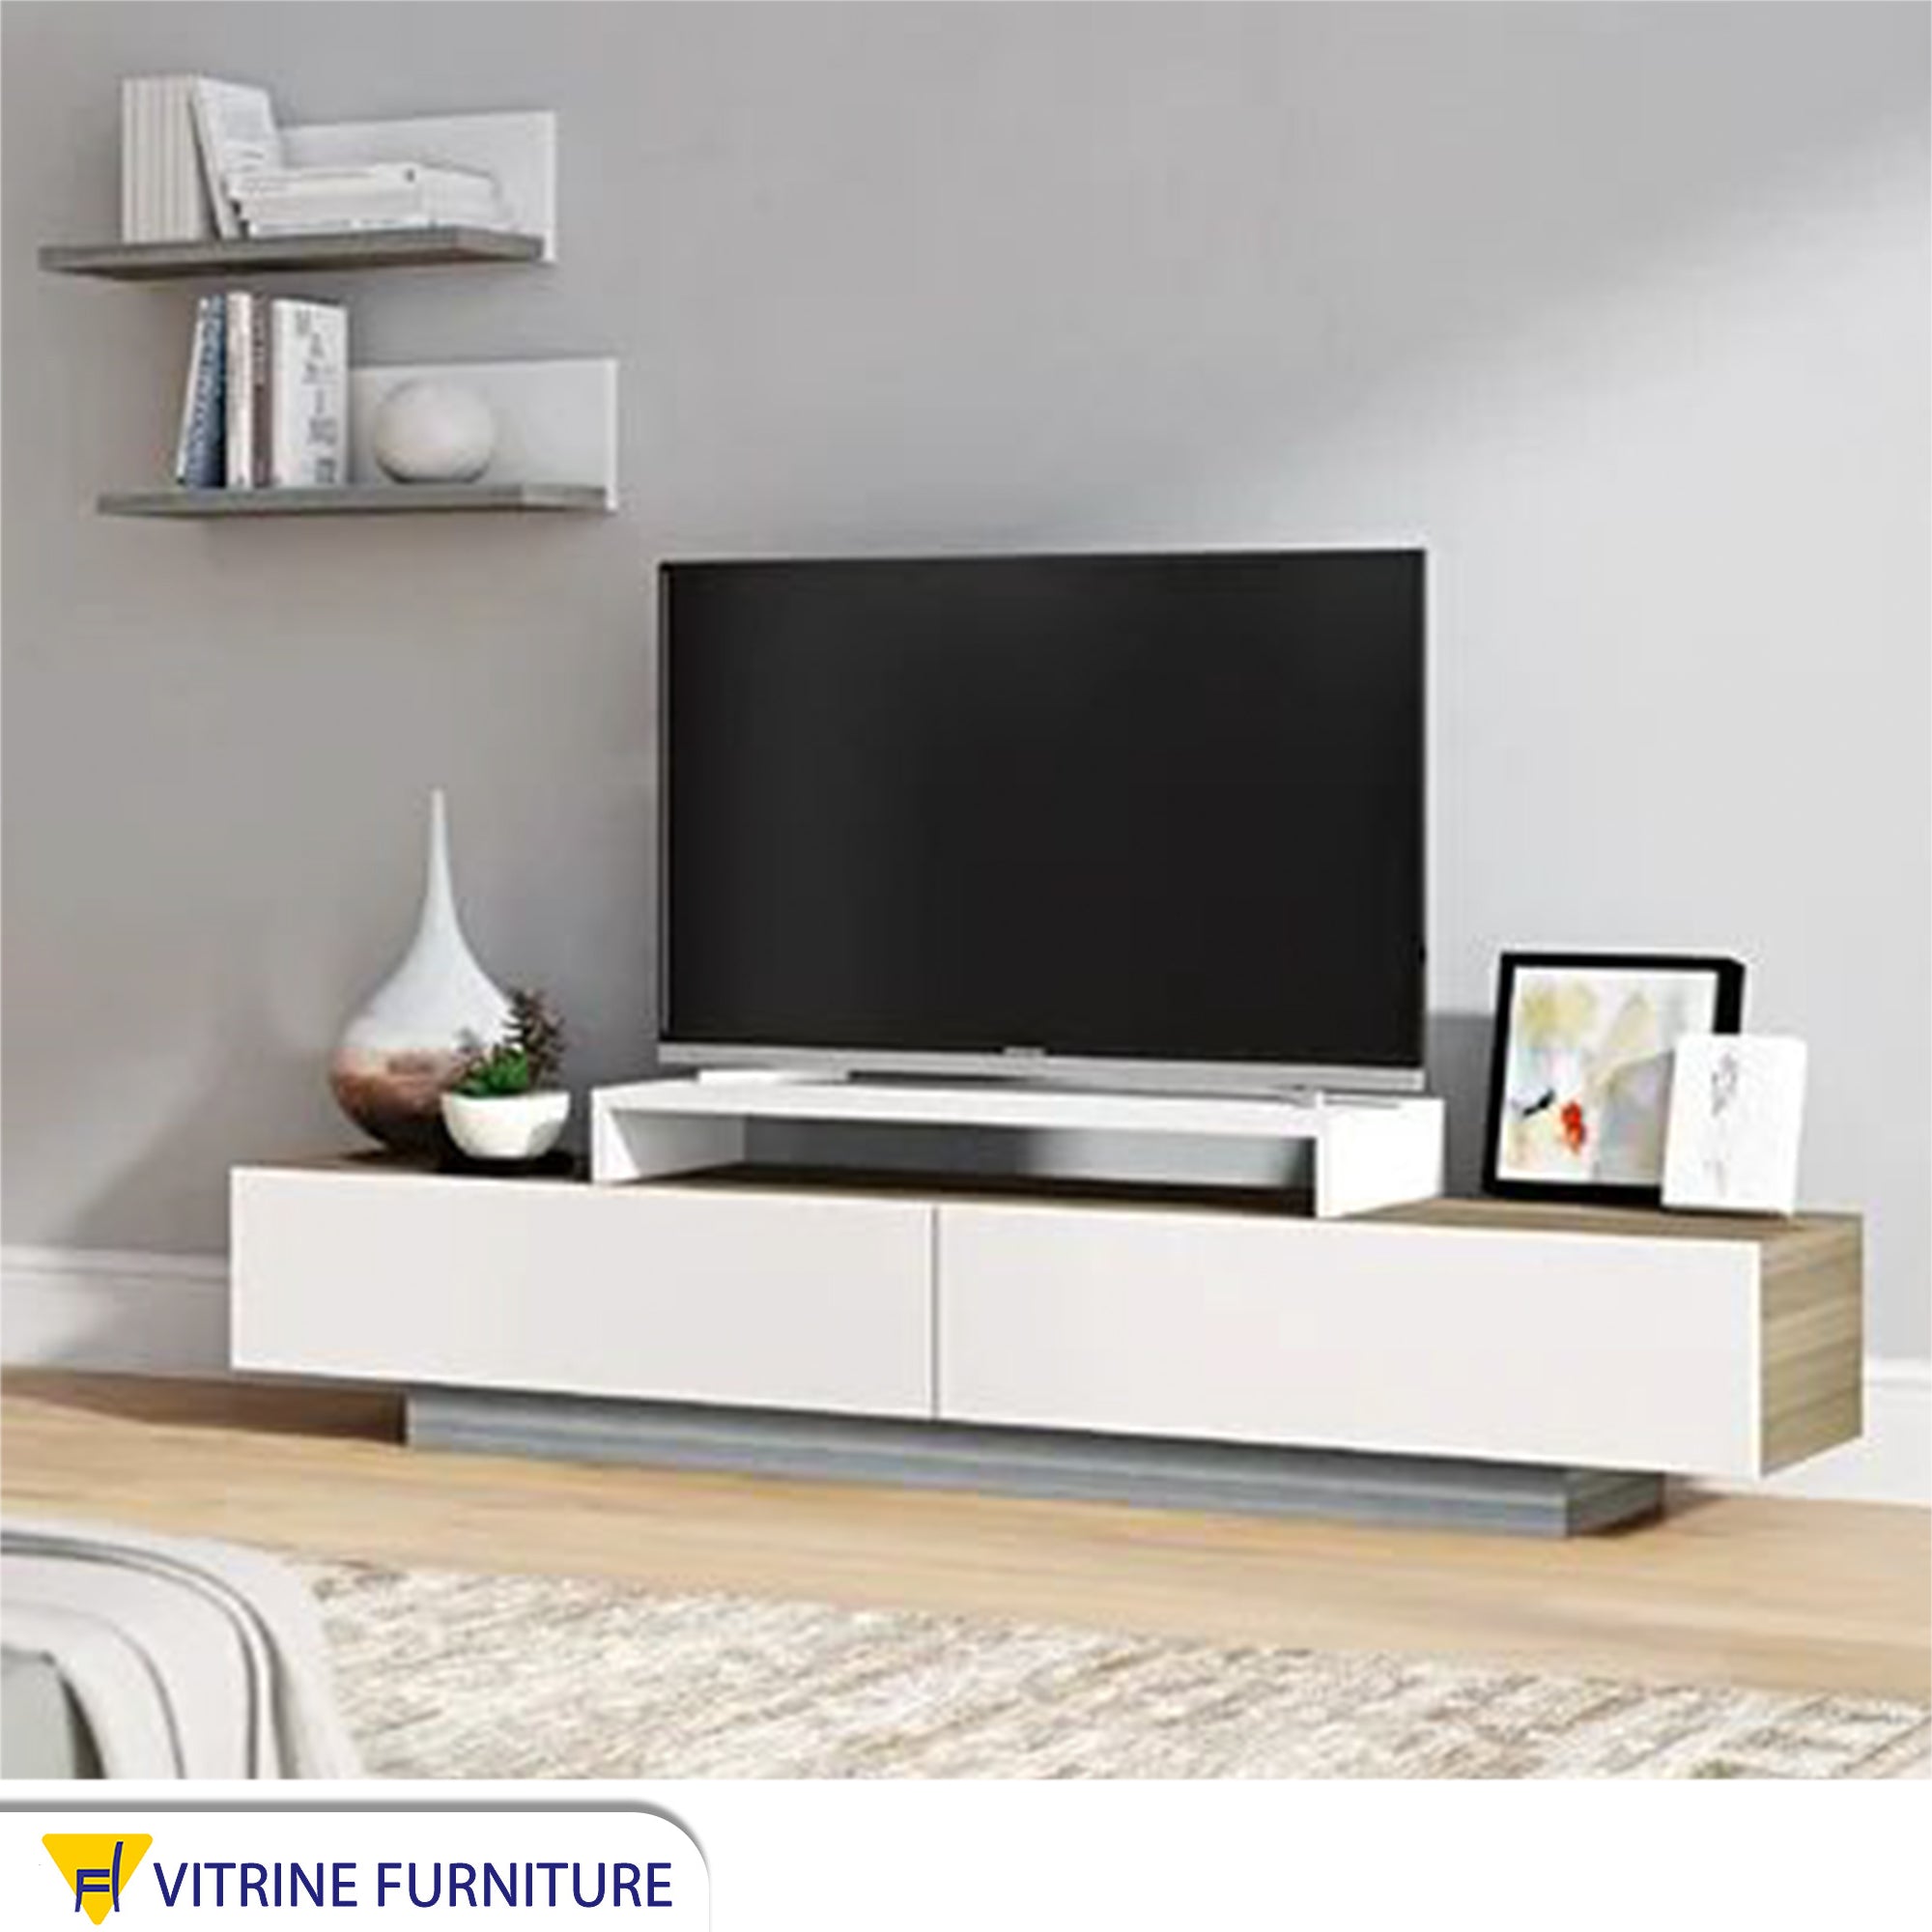 TV table with a modern design in white and beige wood